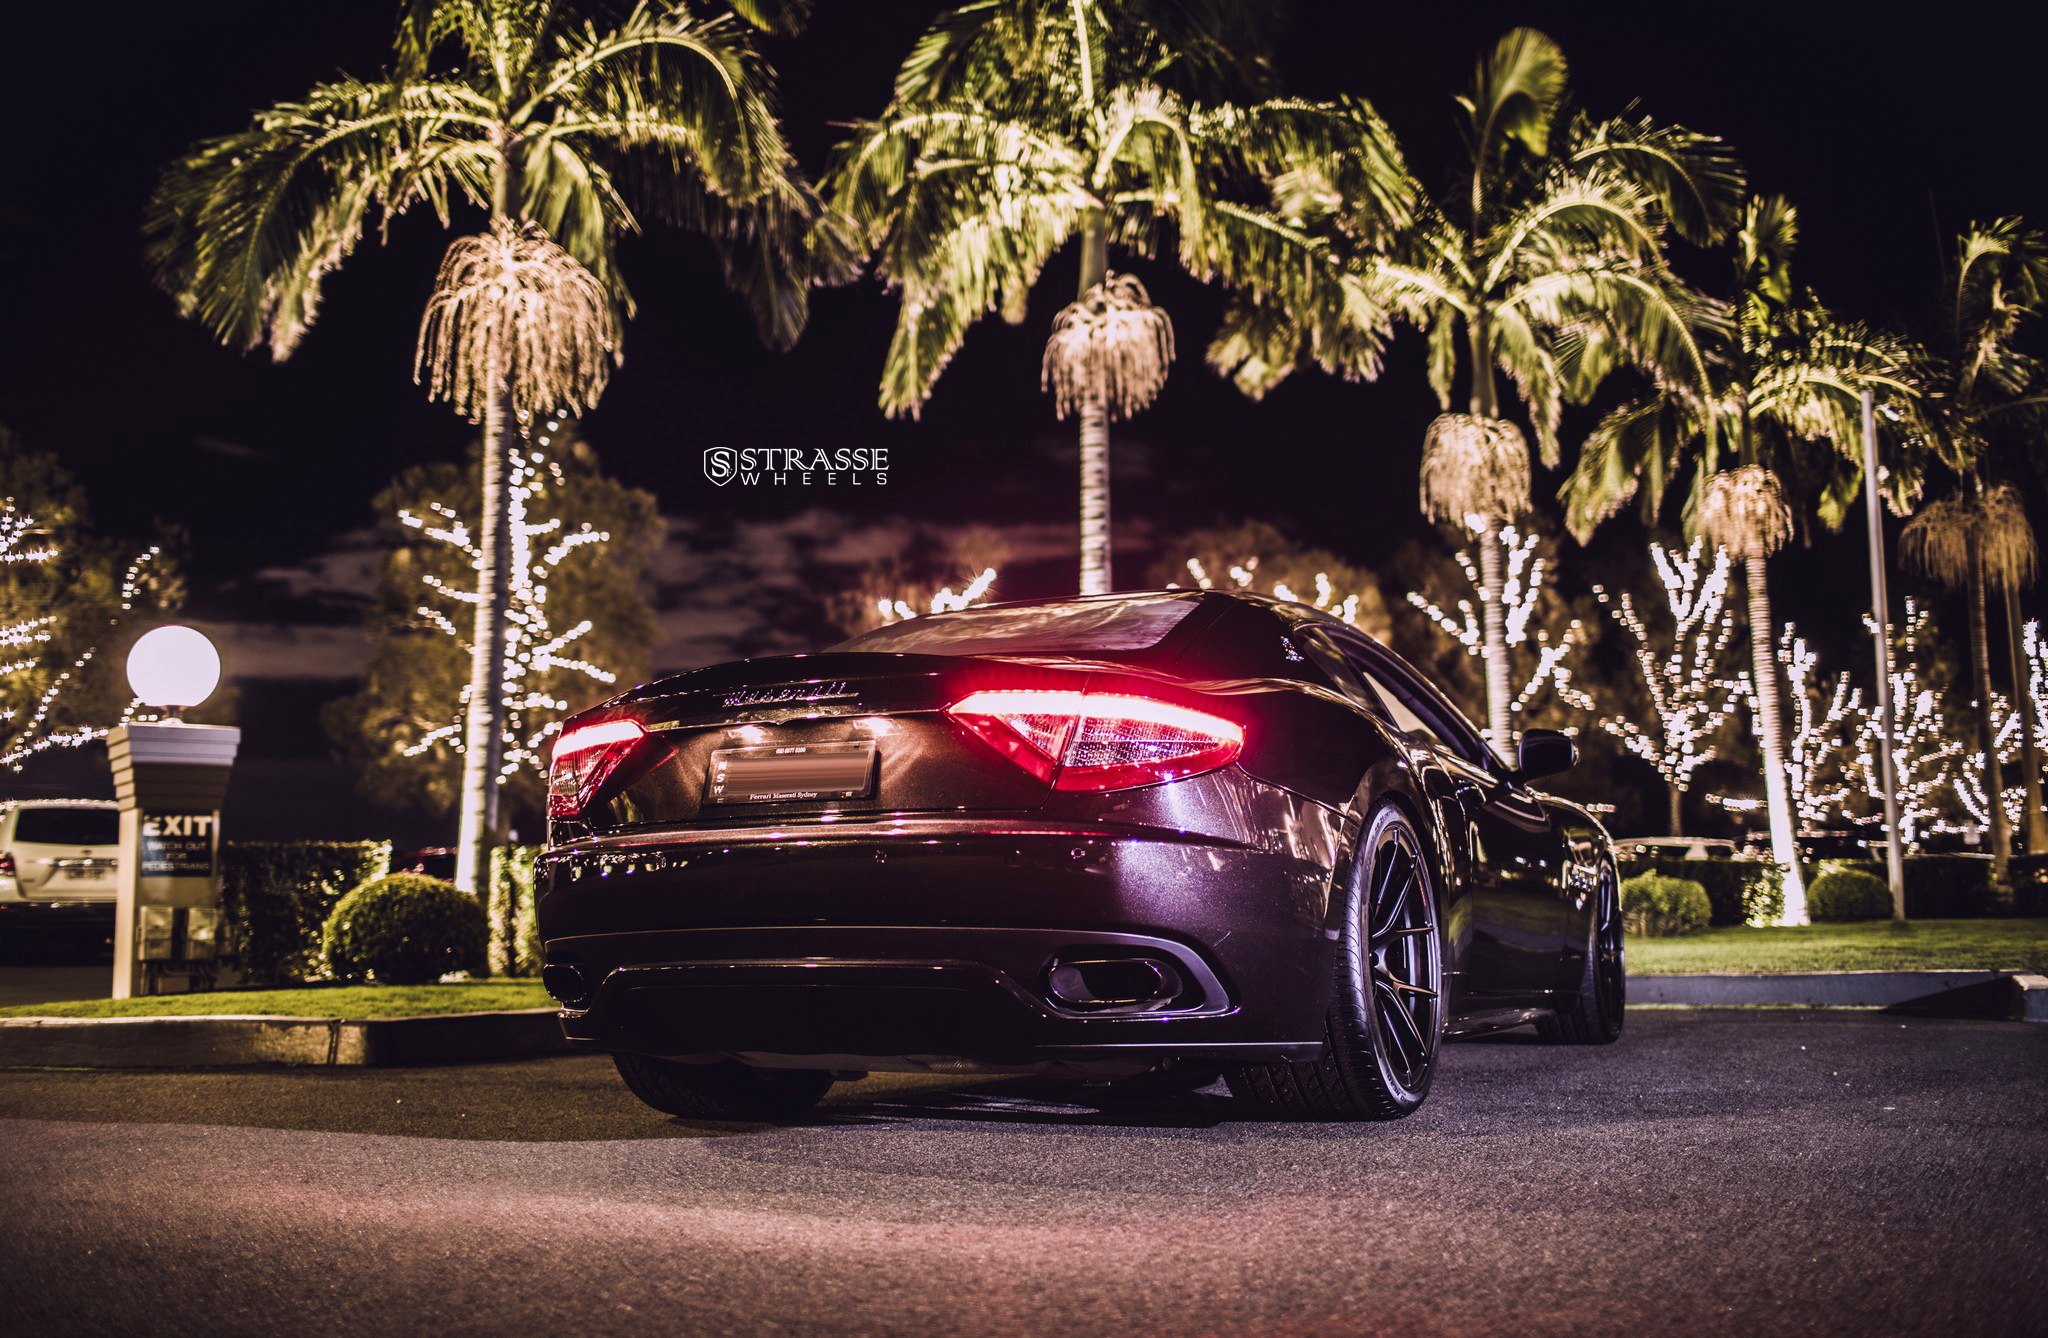 Rear Diffuser with Single Exhaust Tips on Maserati Granturismo - Photo by Strasse Forged